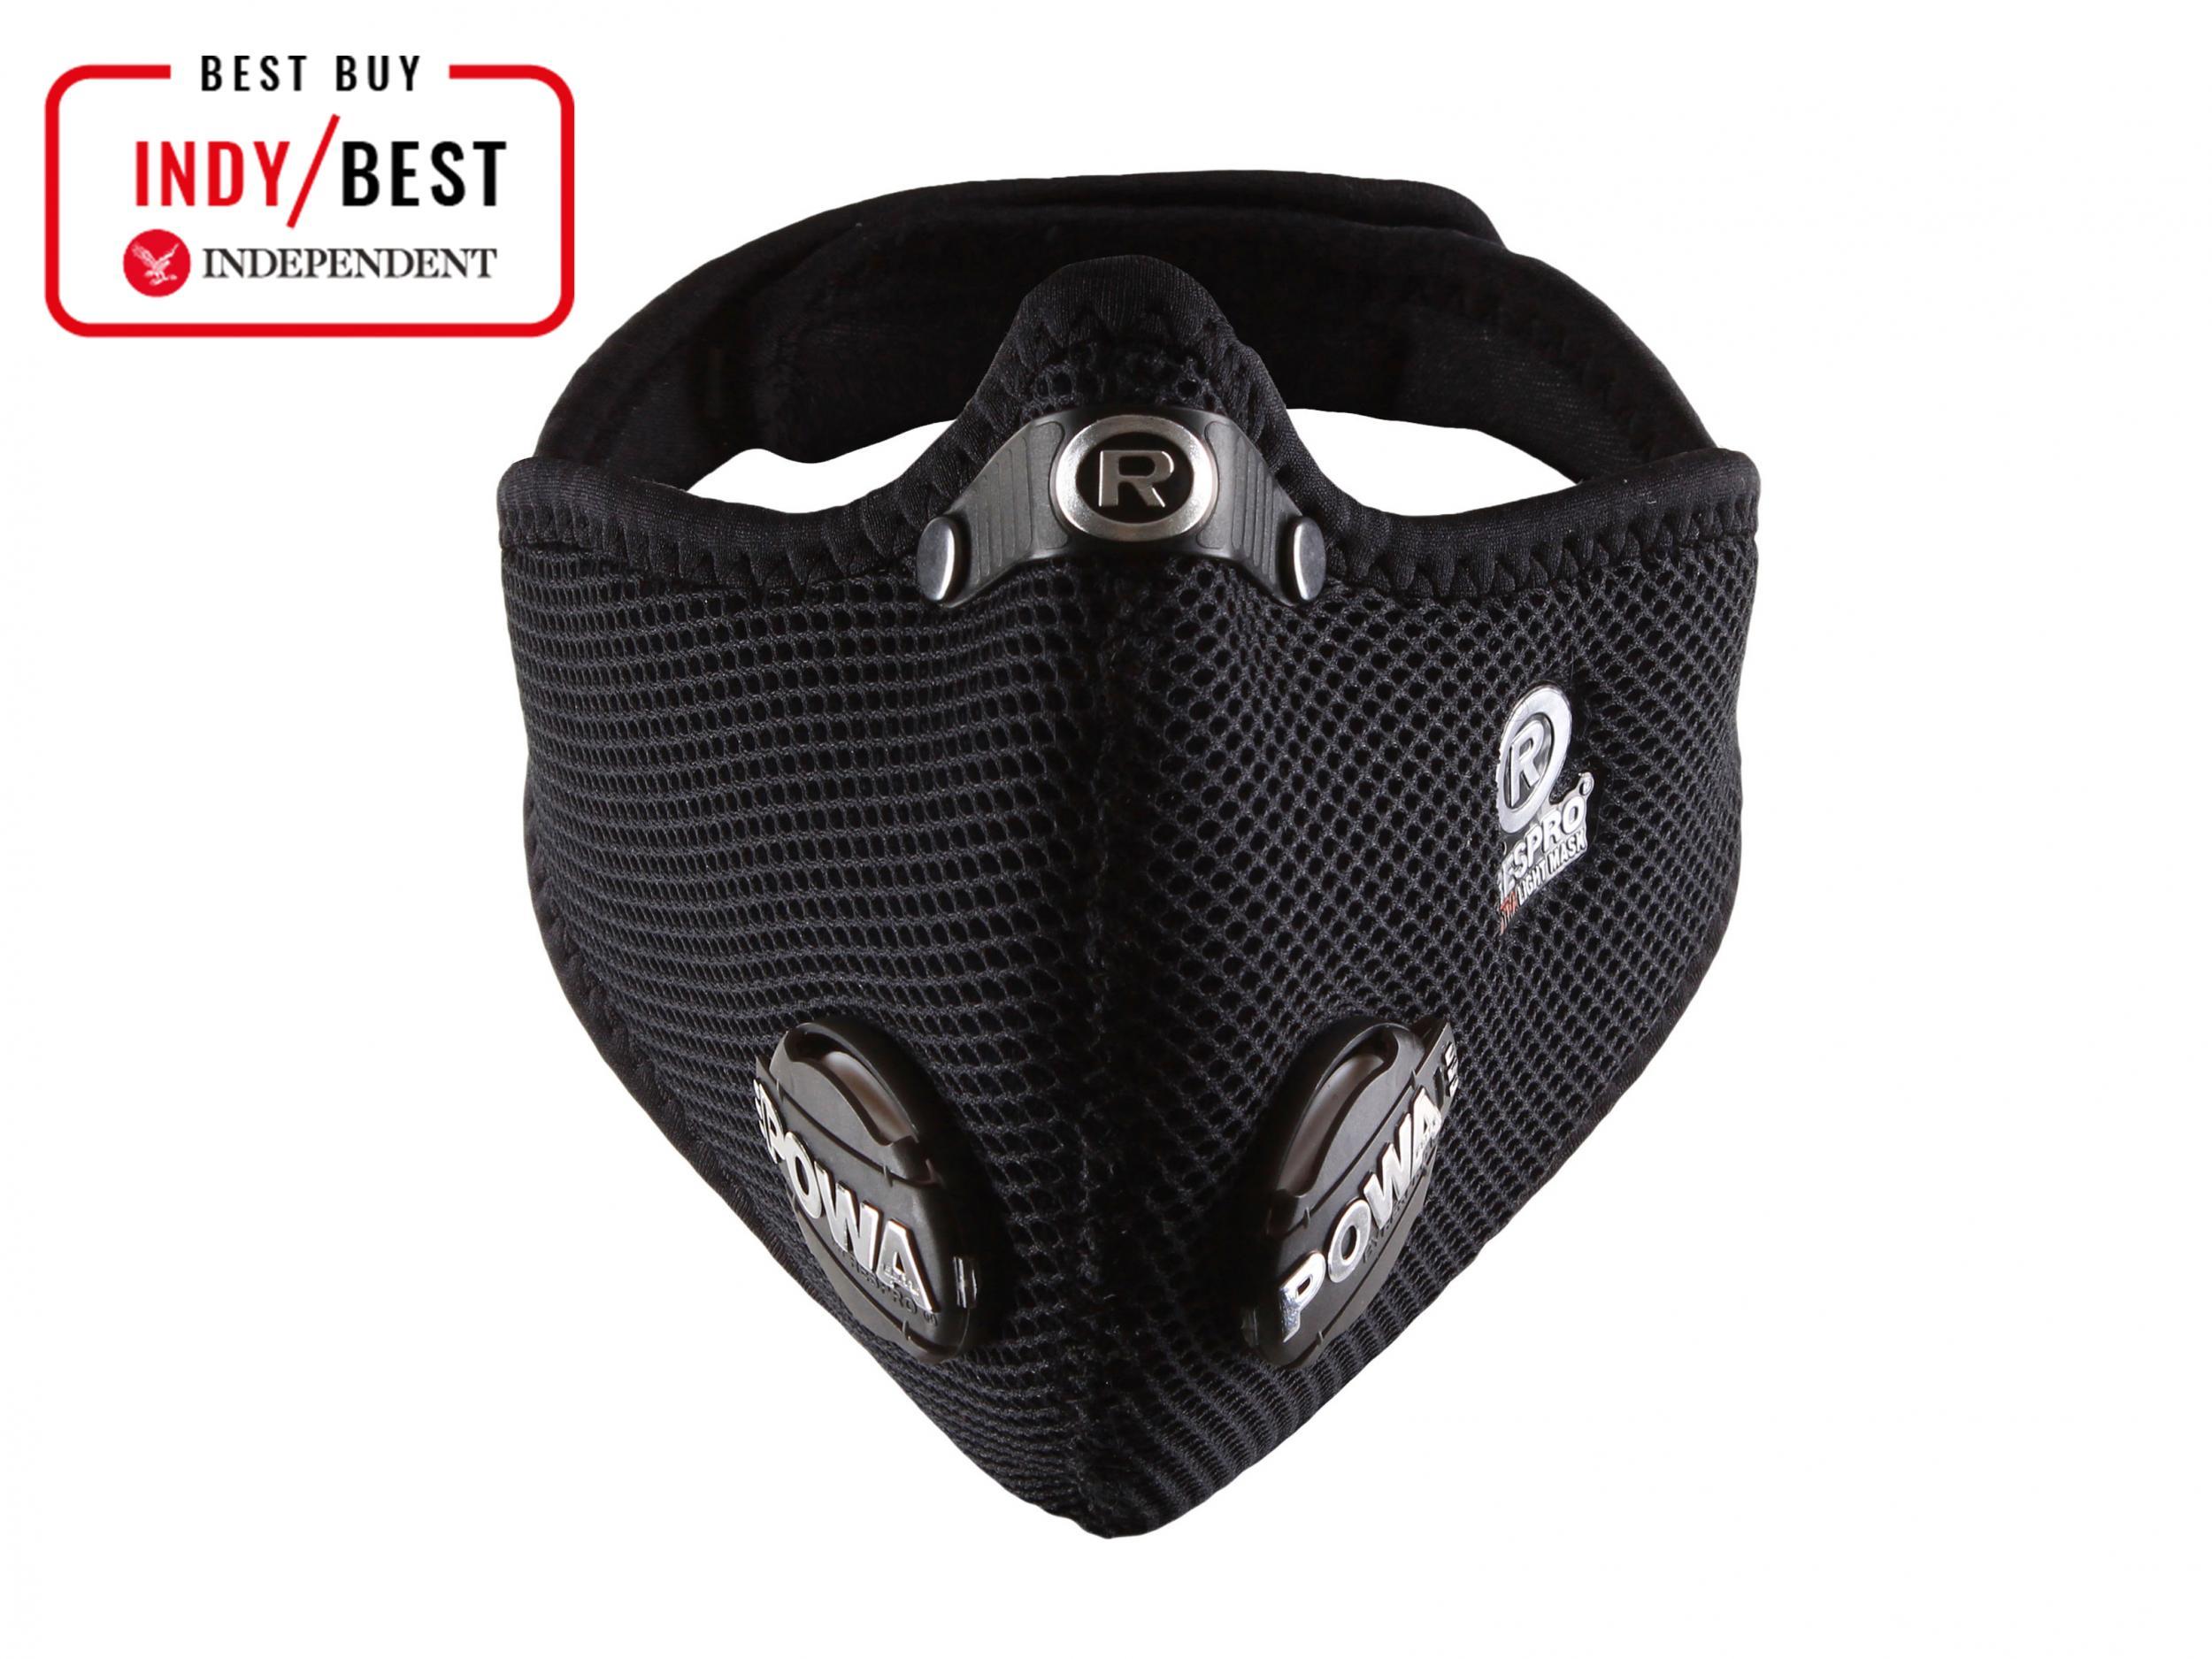 Red Respro City Motorcycle Motorbike Anti Pollution Face Mask 